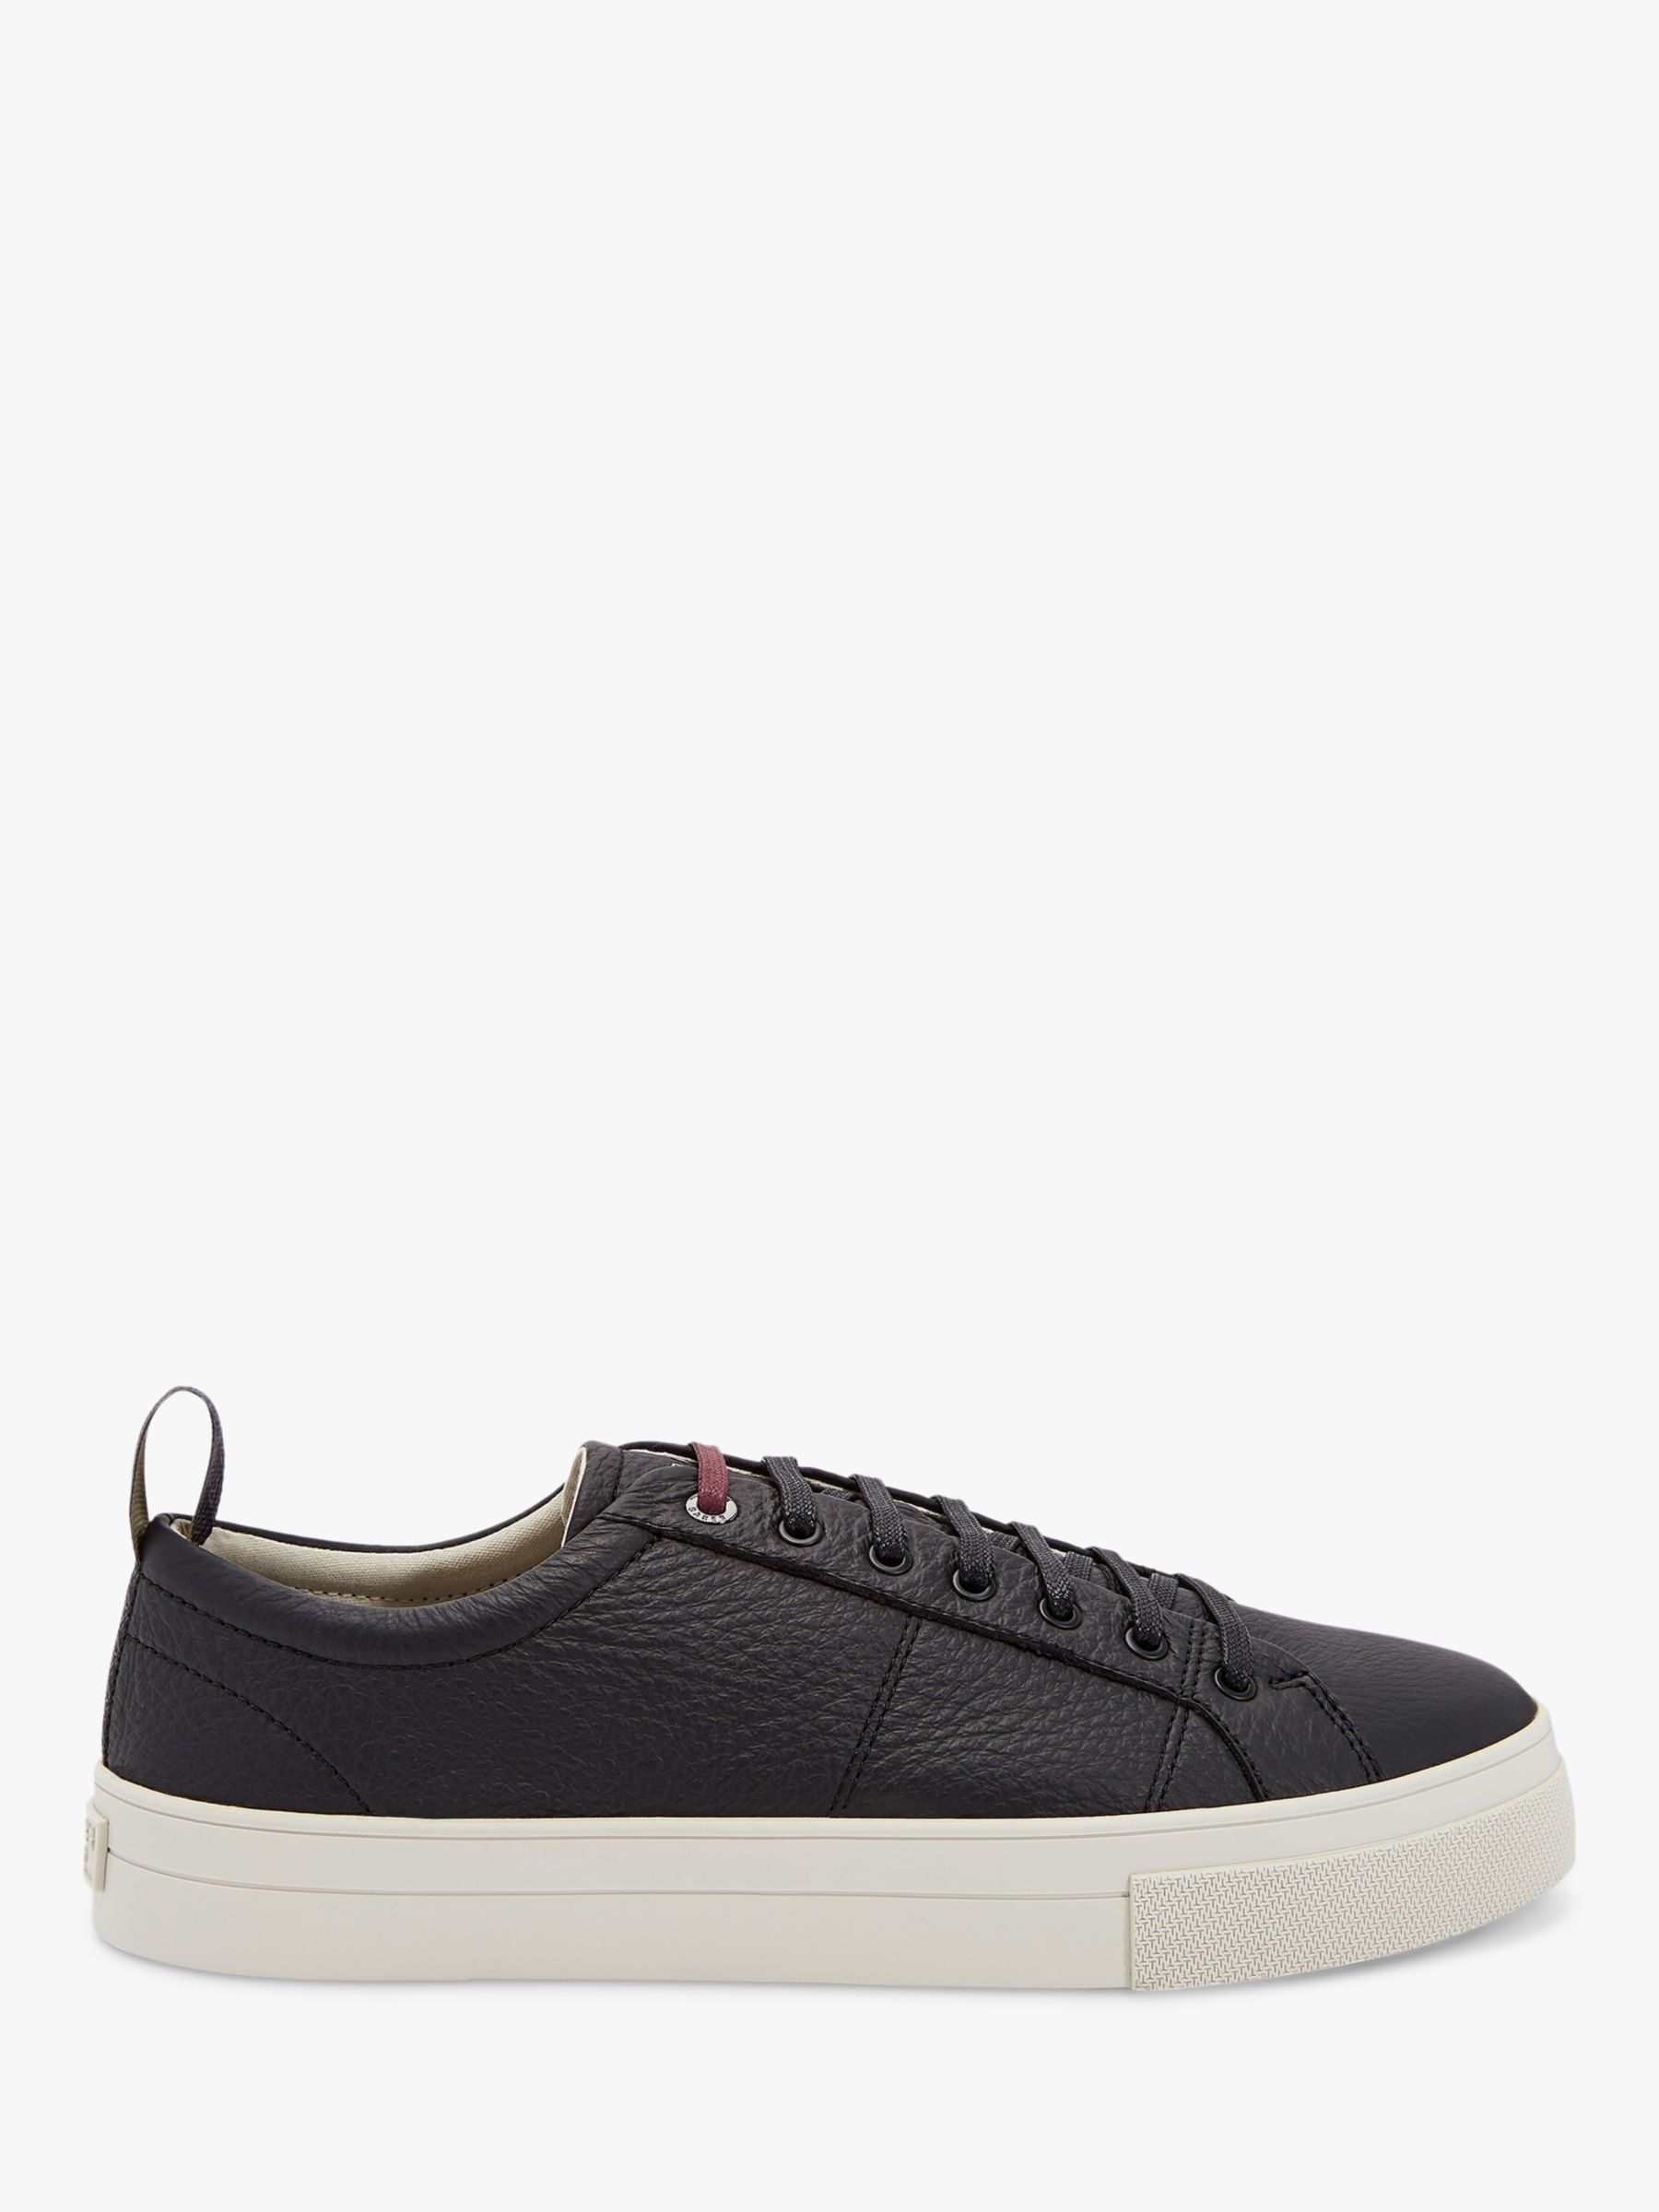 Ted Baker Ephran Leather Trainers